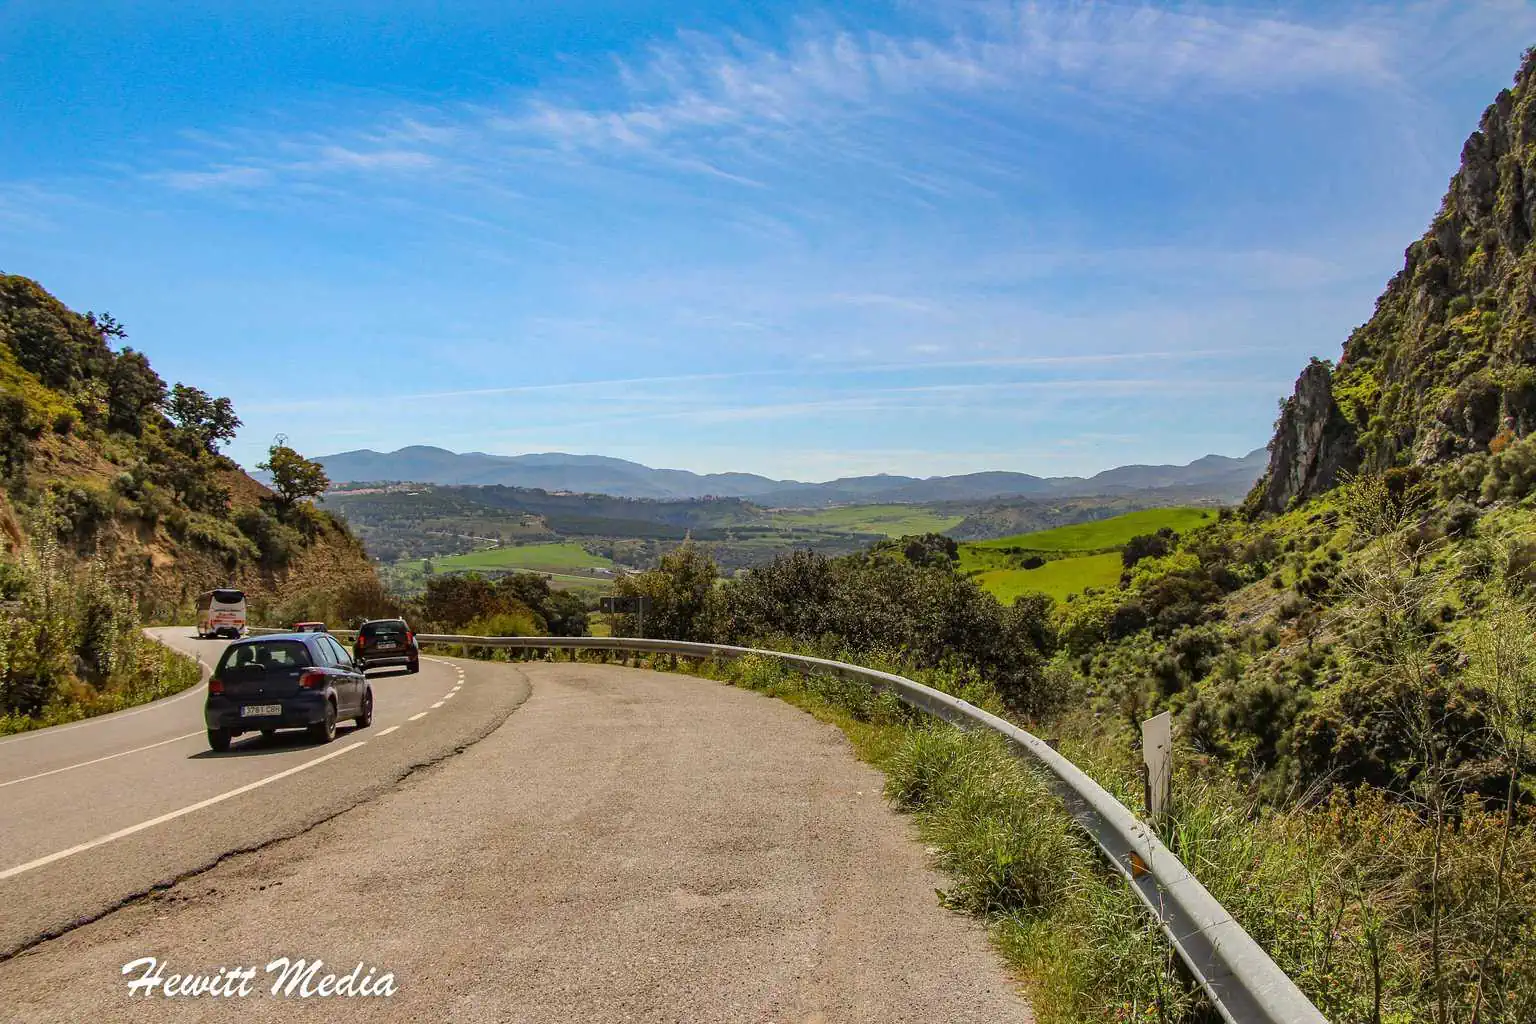 Getting to Ronda, Spain